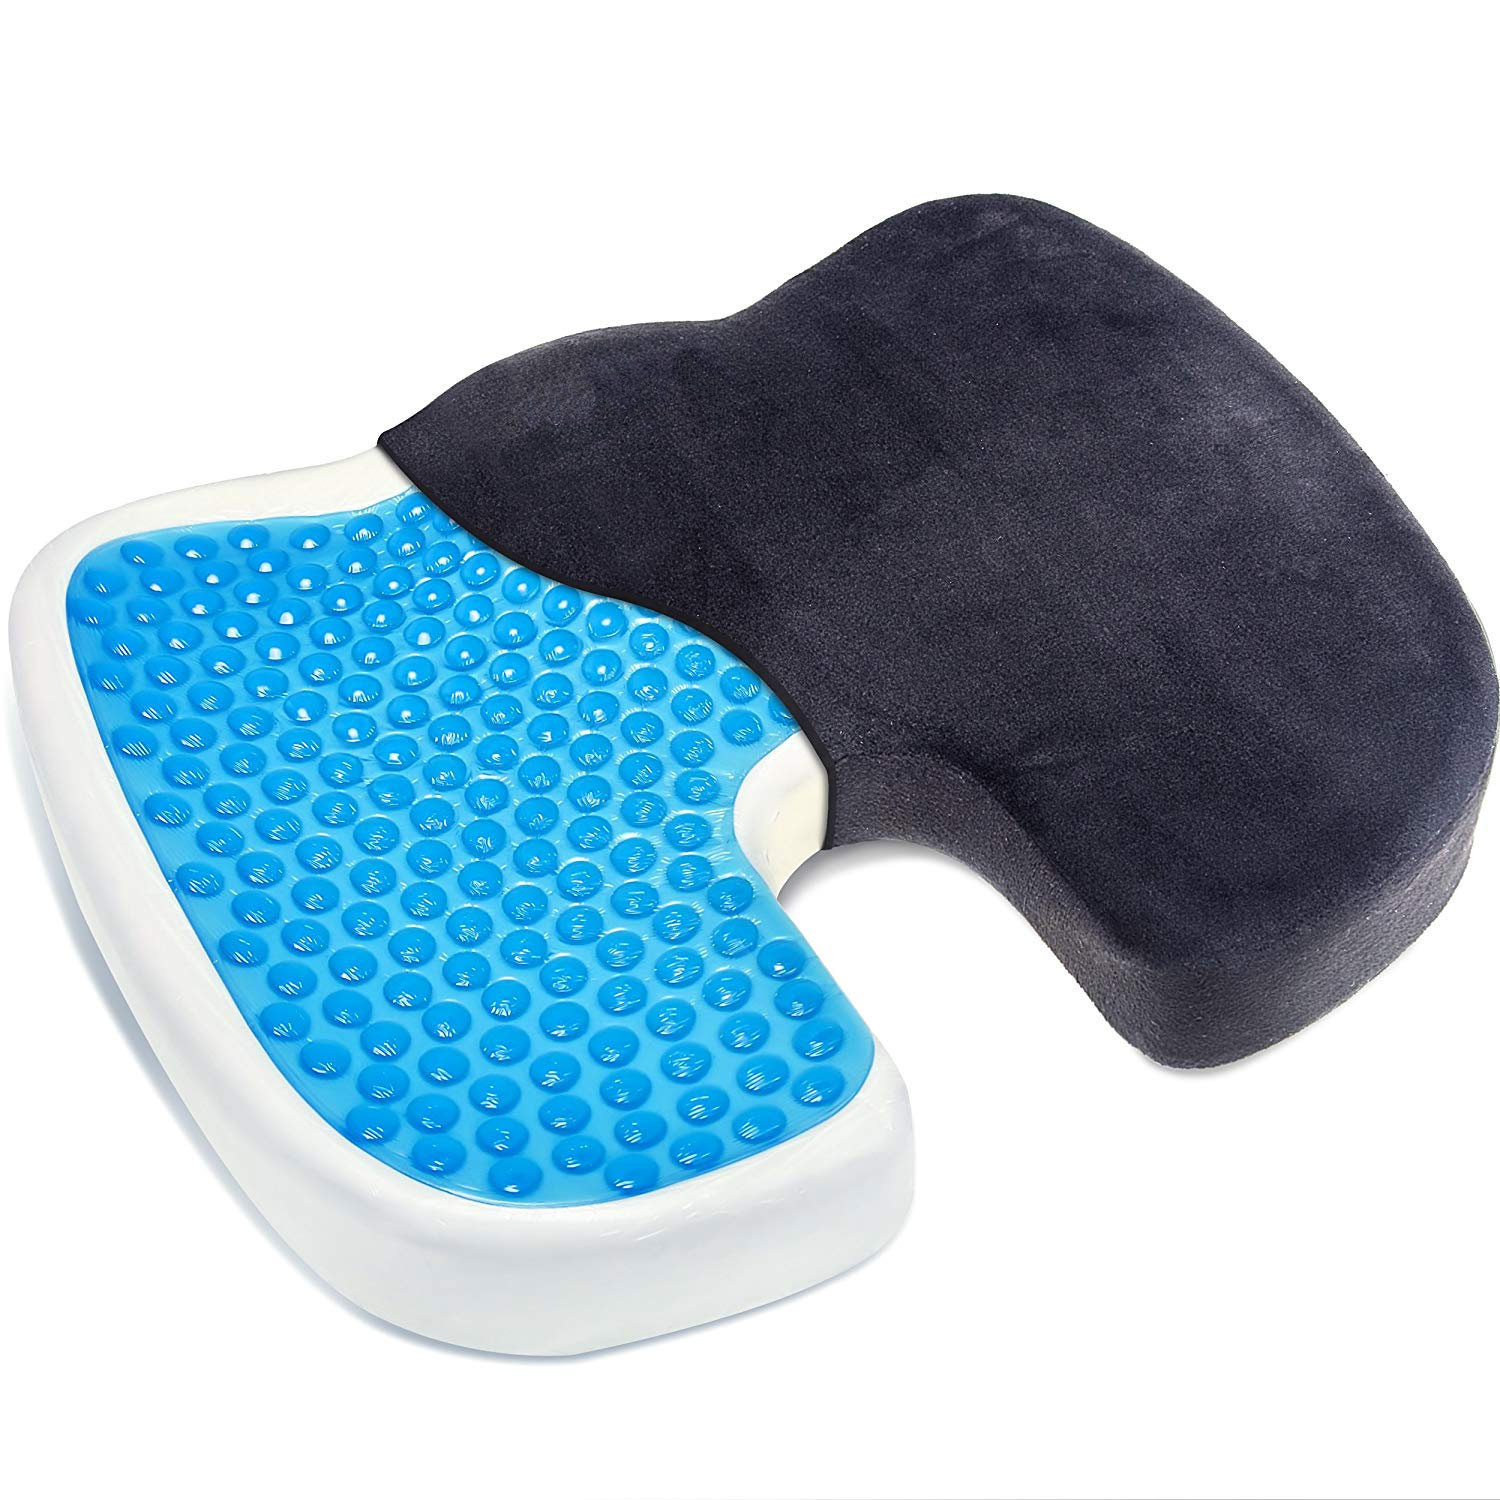 1pc Gel Seat Cushion, Soft, Comfortable And Breathable For Long Time Sitting,  Suitable For Wheelchair To Reduce Sweating, Suitable For Office Chair Use